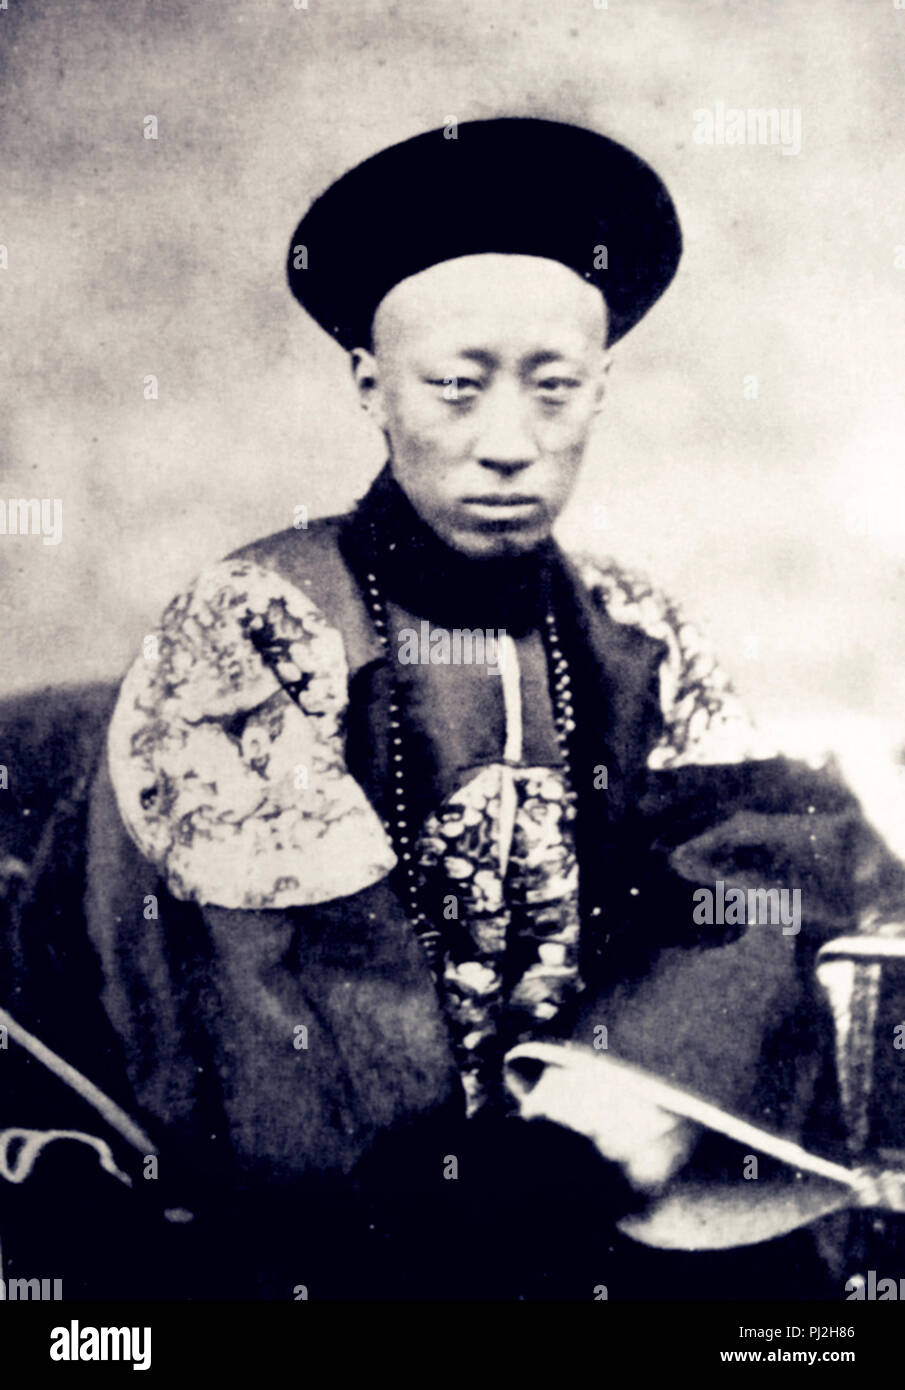 Prince Gong, Cixi's crucial ally during the Xinyou Coup. He was rewarded by  Cixi for his help during her most difficult times, but was eventually  eliminated from office by Cixi for his